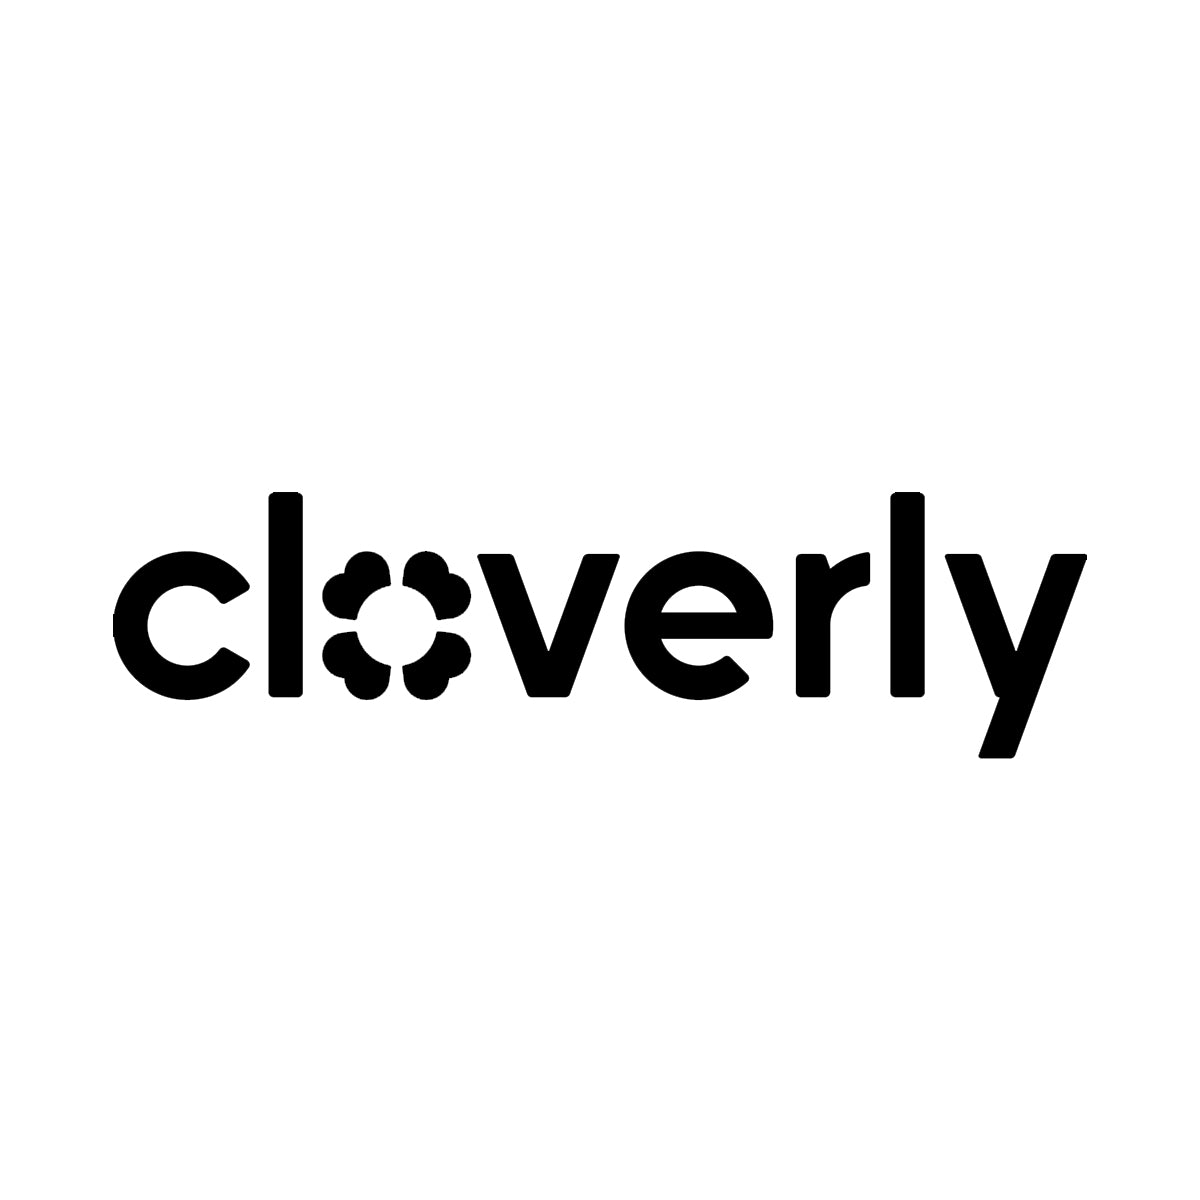 Our products are manufactured at a solar powered-facility, that also is dedicated to offsetting all carbon emissions throughout its operations. Additionally, we’ve partnered with Cloverly to offer free carbon-neutral shipping to our customers.